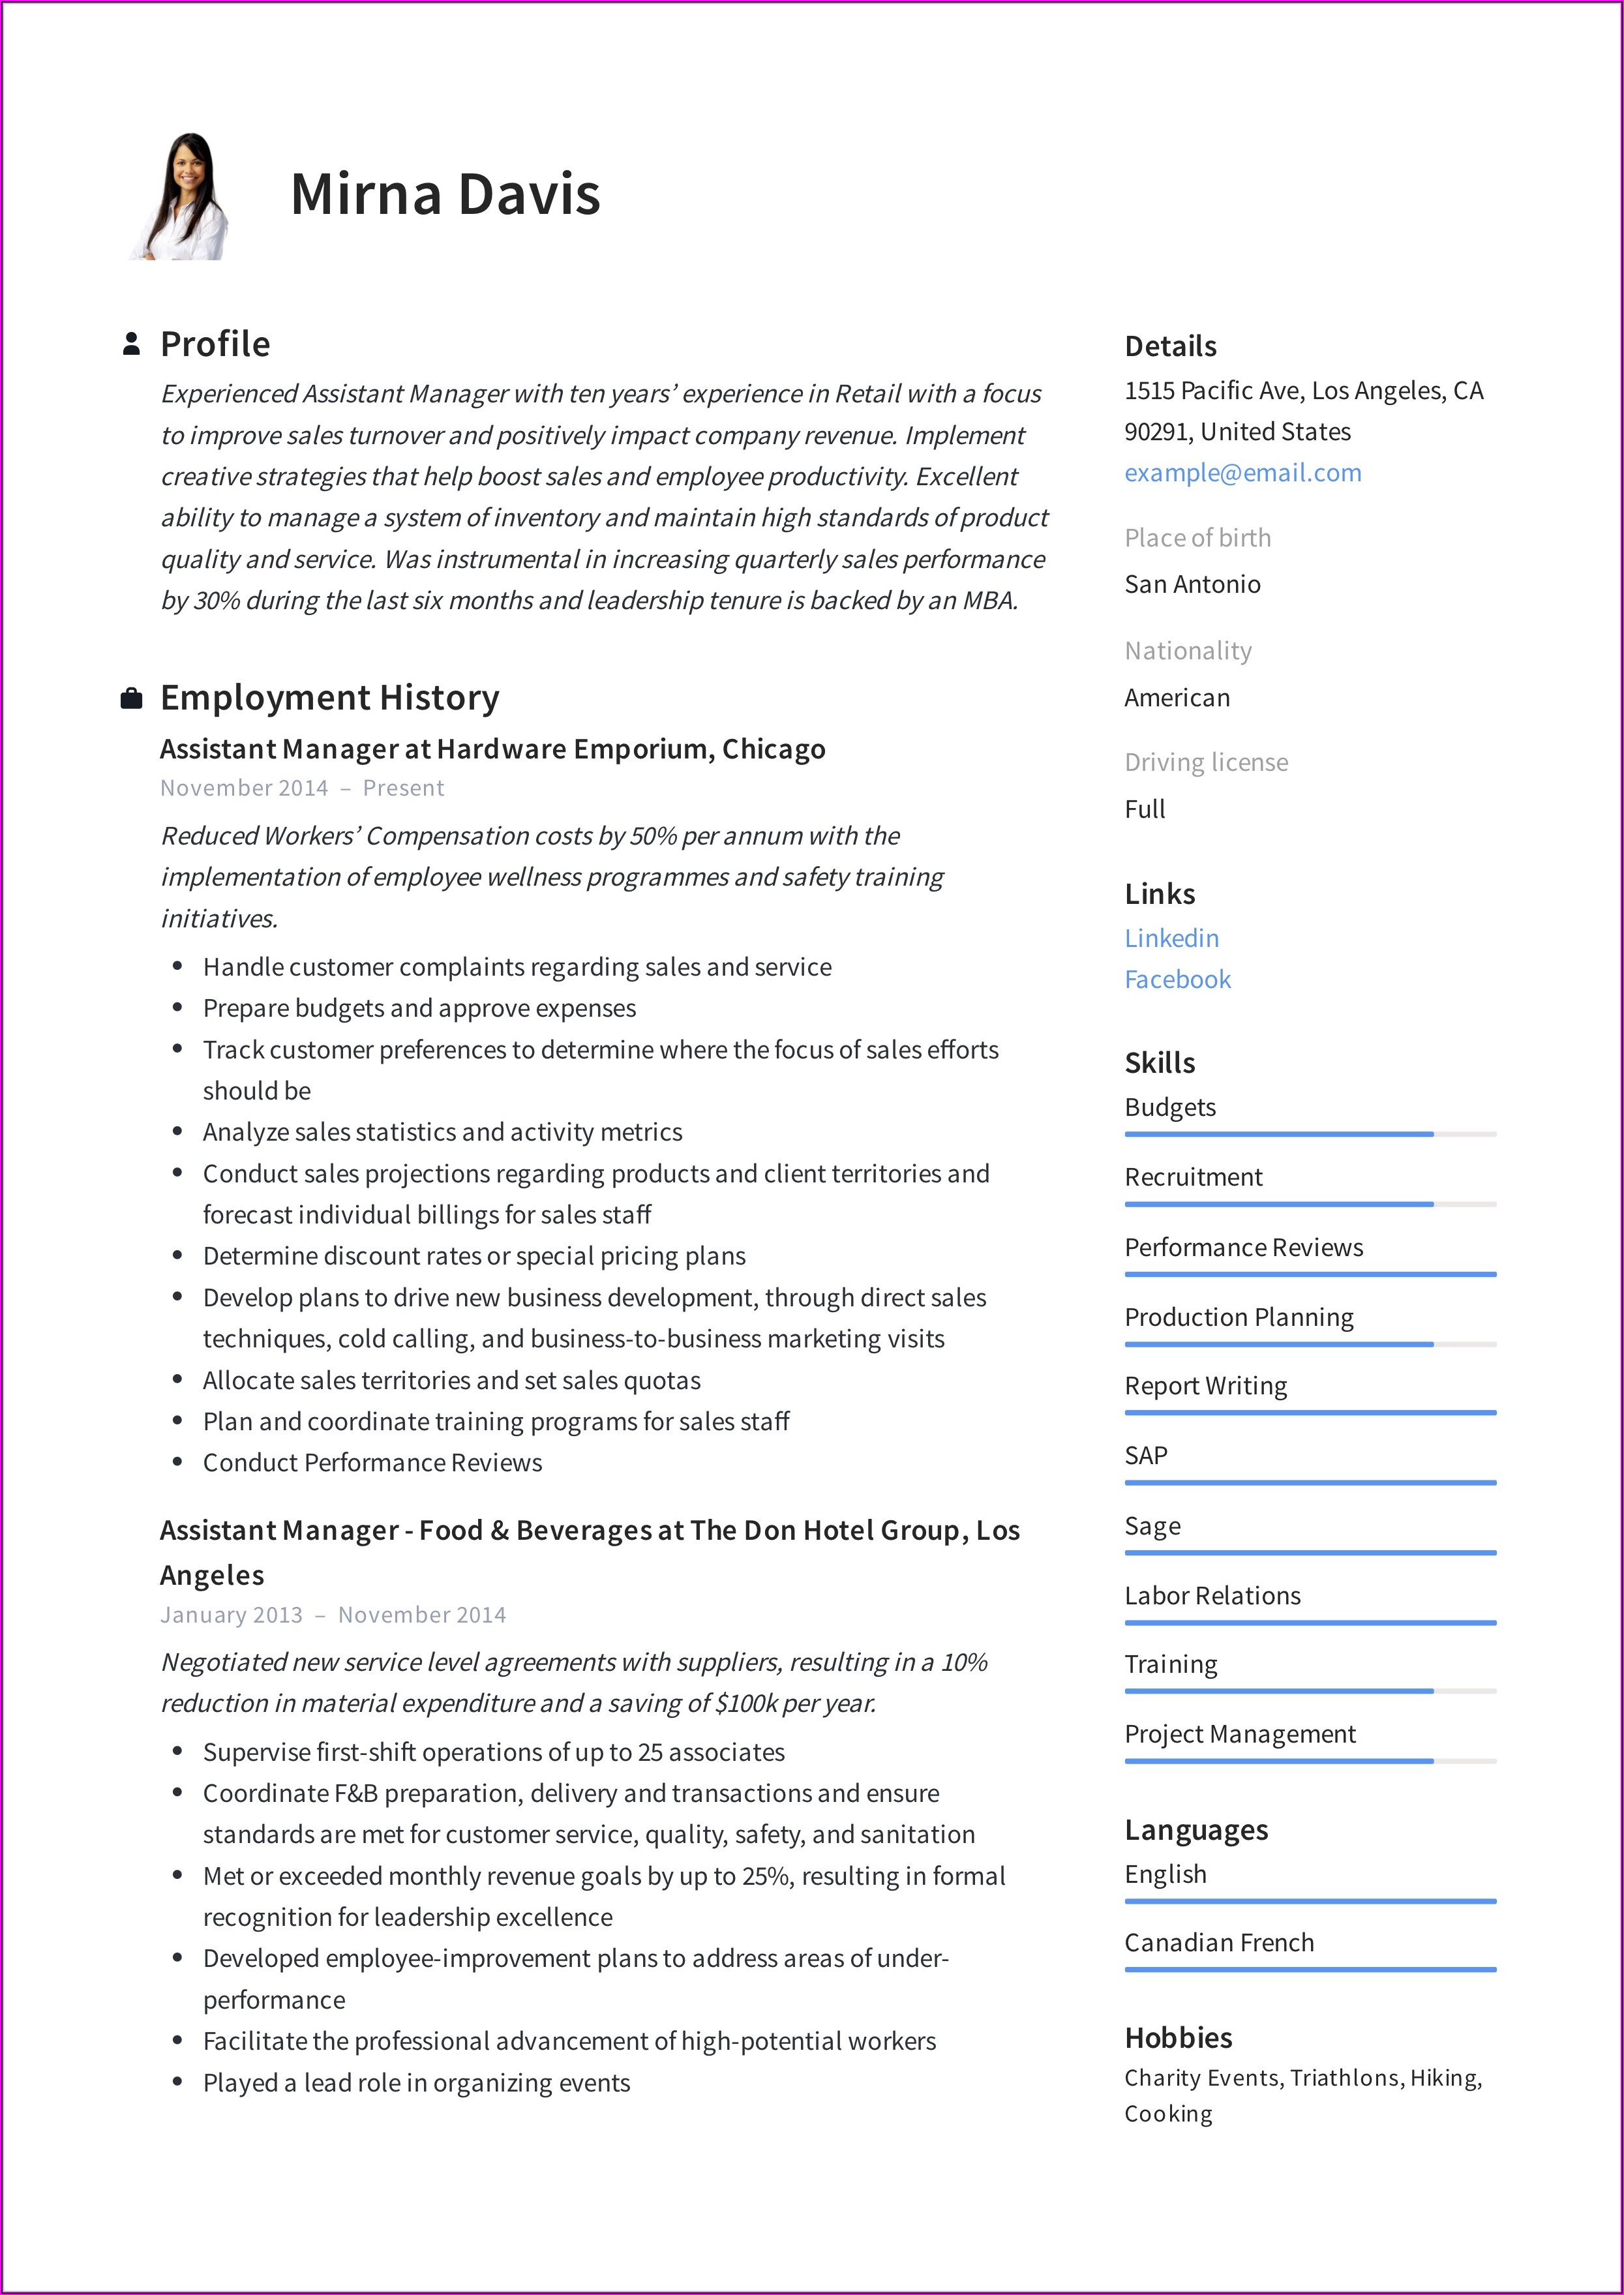 Resume Format For Assistant Manager Quality